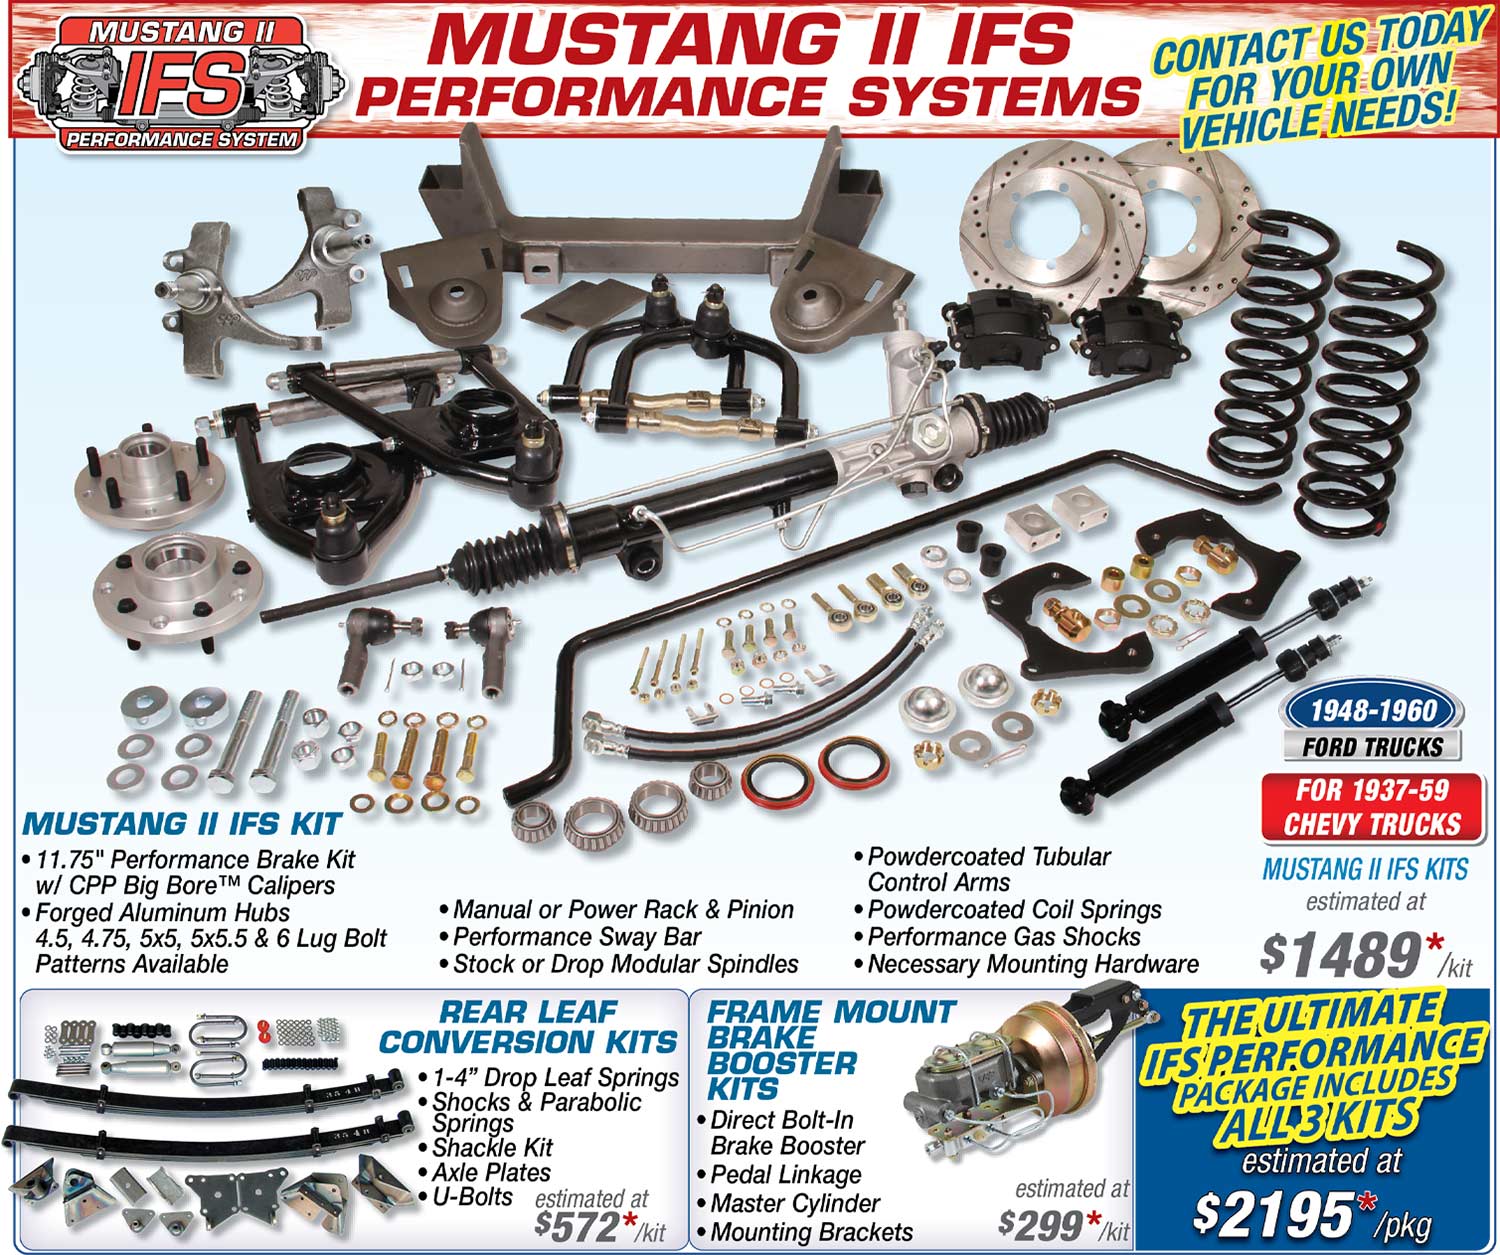 Mustang II IFS Performance Systems